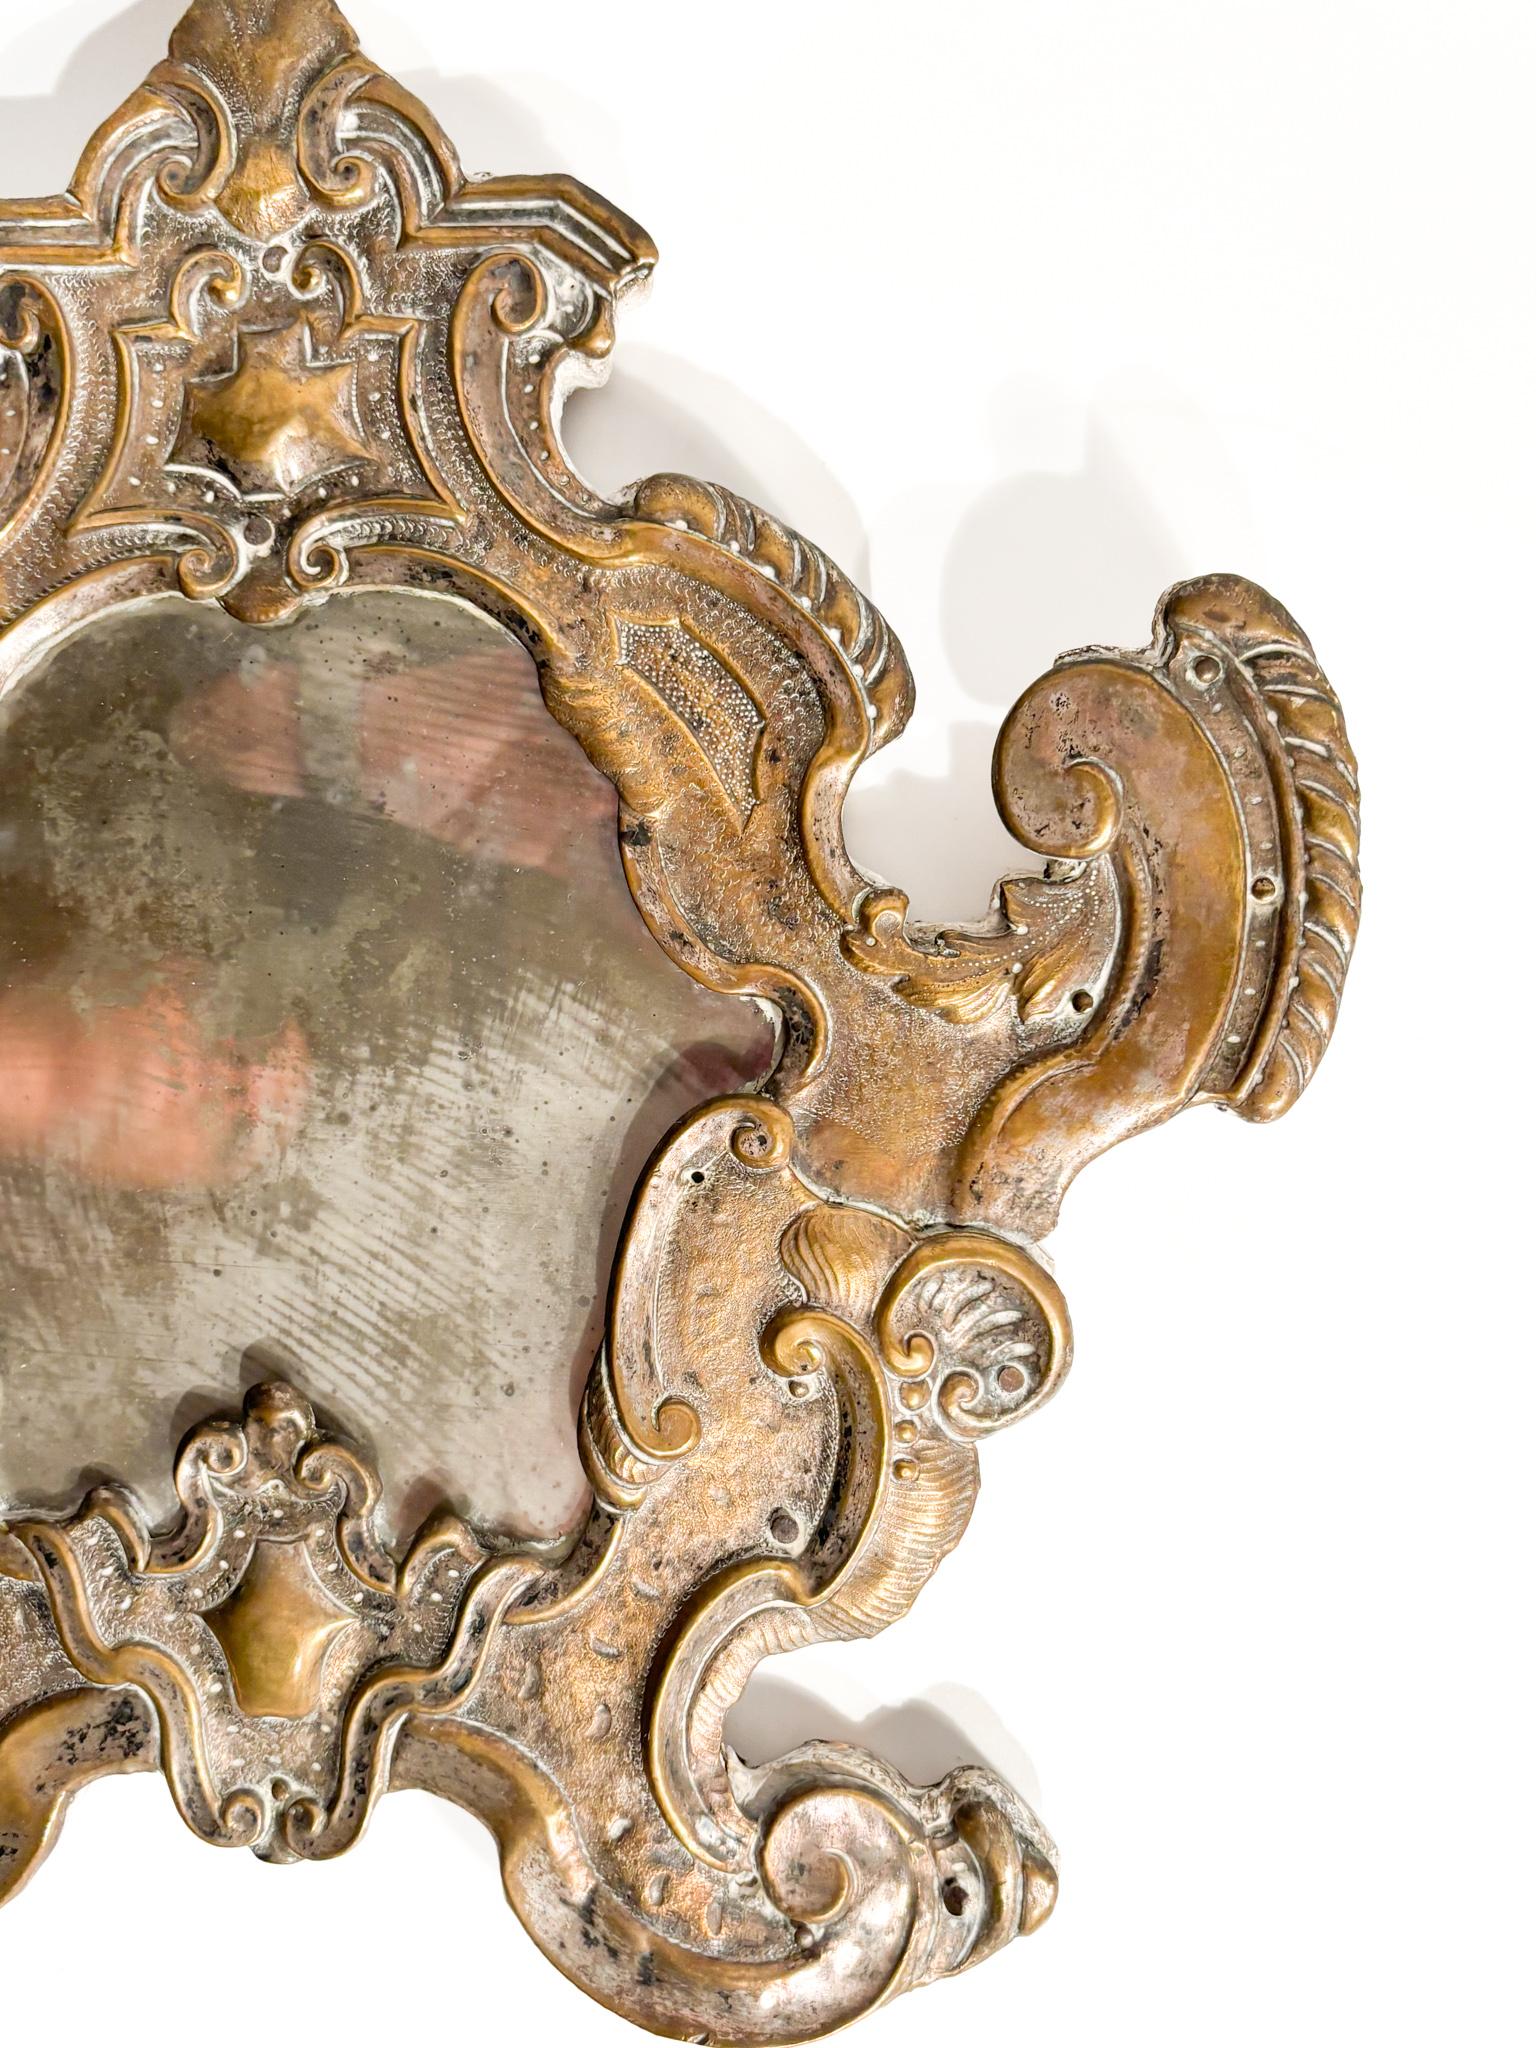 Italian Silver Mirror on Wood with Mercury Mirror Late 19th Century For Sale